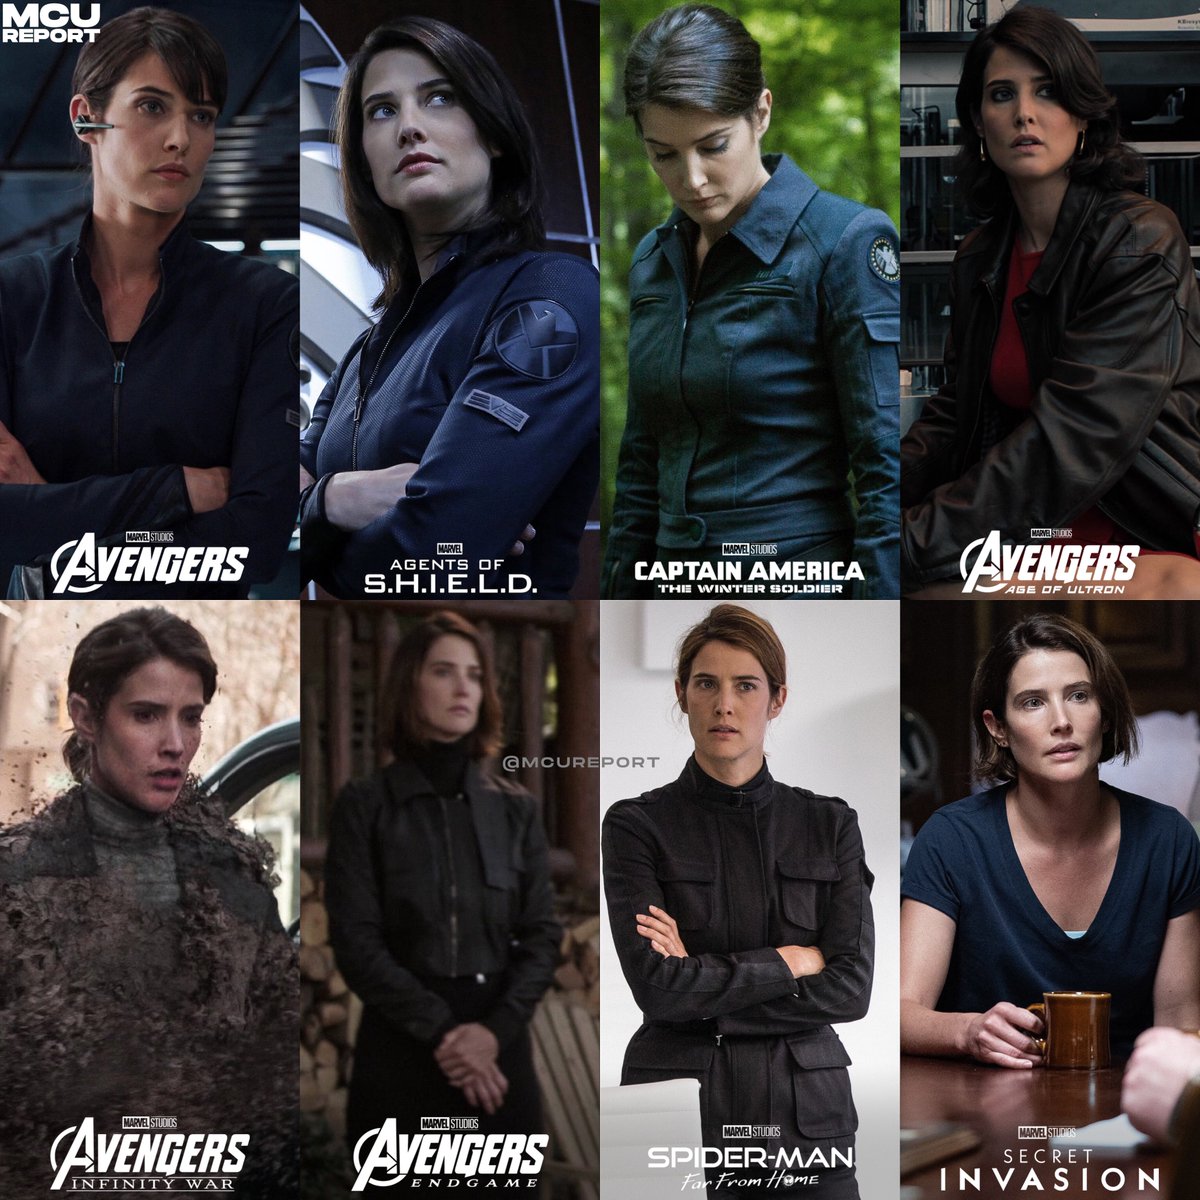 Cobie Smulders portrayed Maria Hill 8 times in live-action Marvel projects 🎬 #SecretInvasion